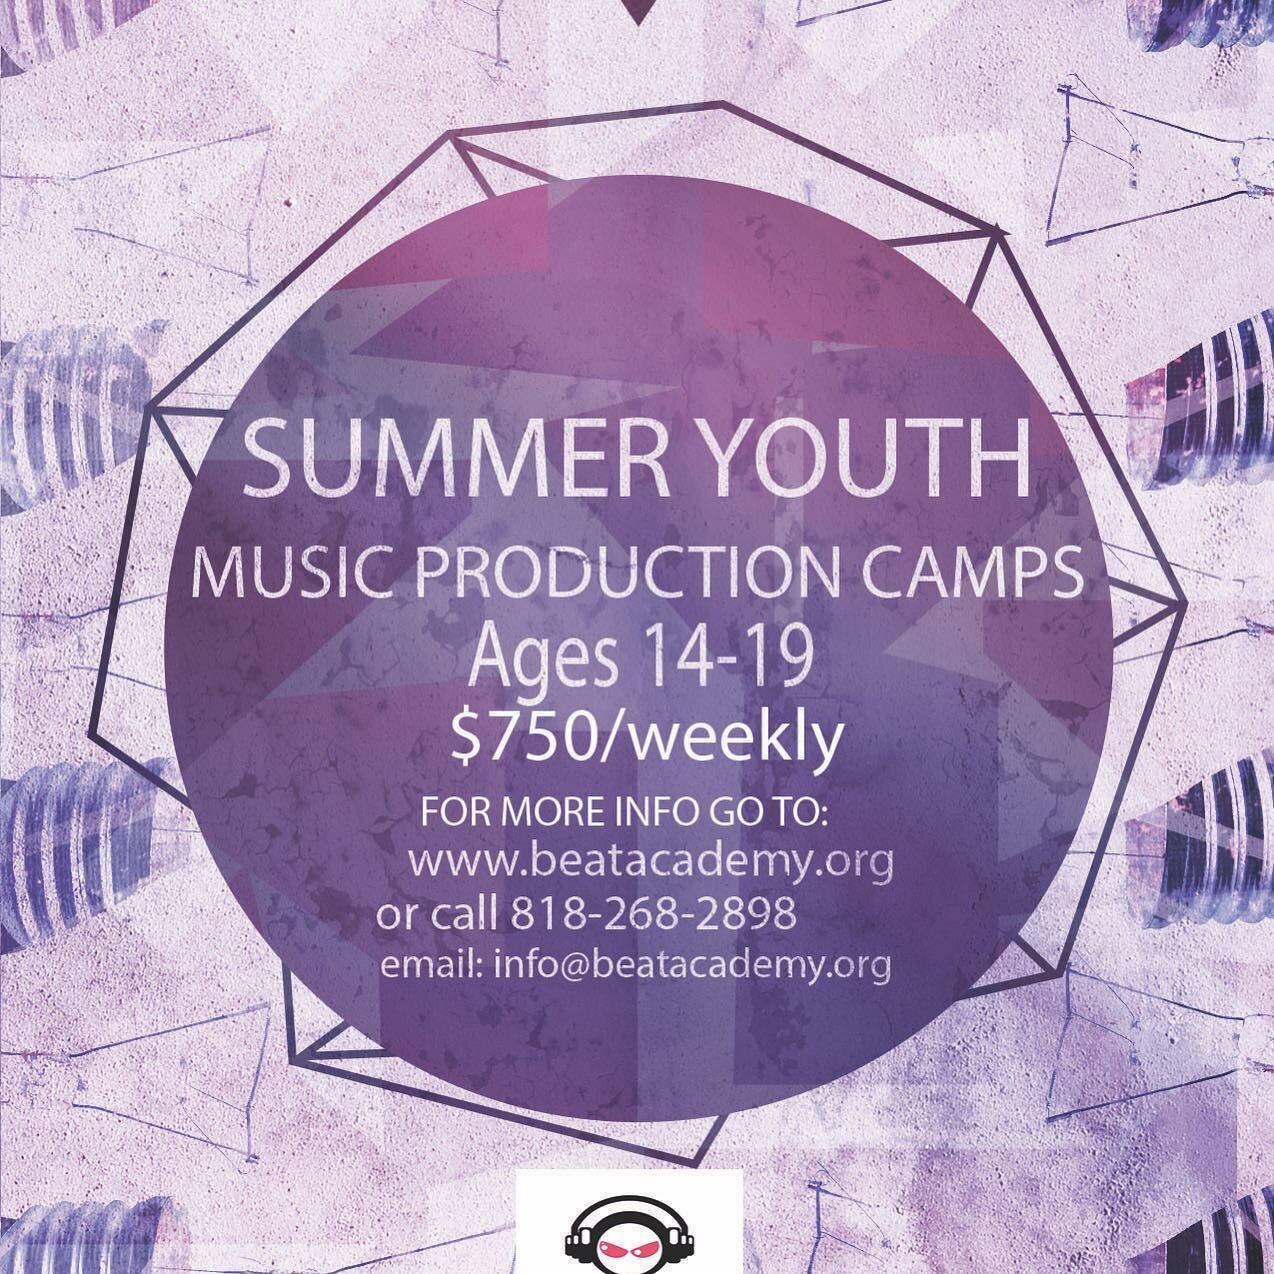 Summer Youth Music Production Camps !!! Sign up now at www.beatacademy.org #musiccamps #musicproduction #musicproducer #summercamp #summercamp2019 #logicprox #losangeles #summervibes